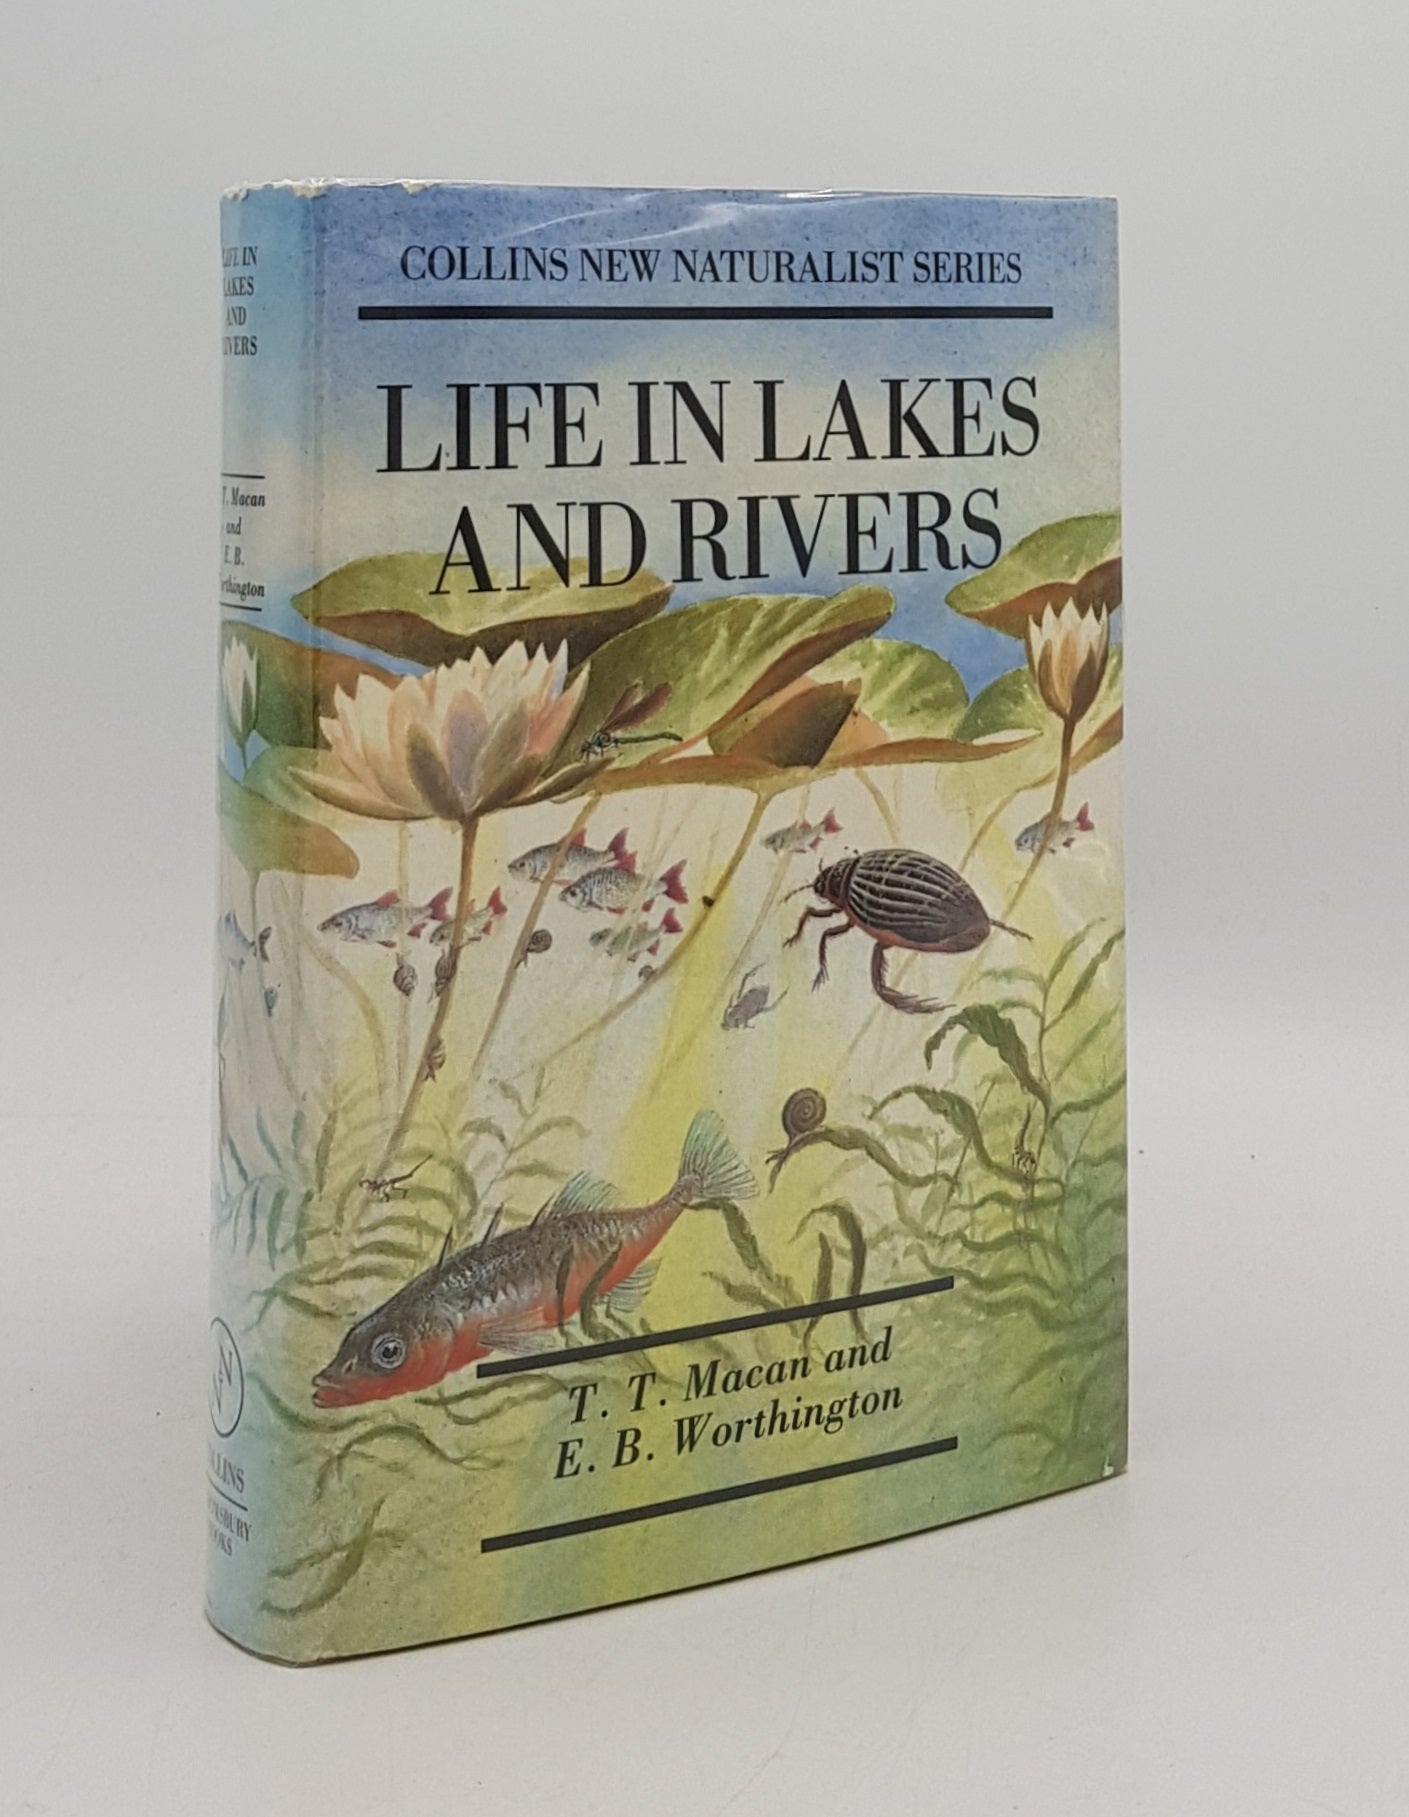 MACAN T.T., WORTHINGTON E.B. - Life in Lakes and Rivers New Naturalist No. 15